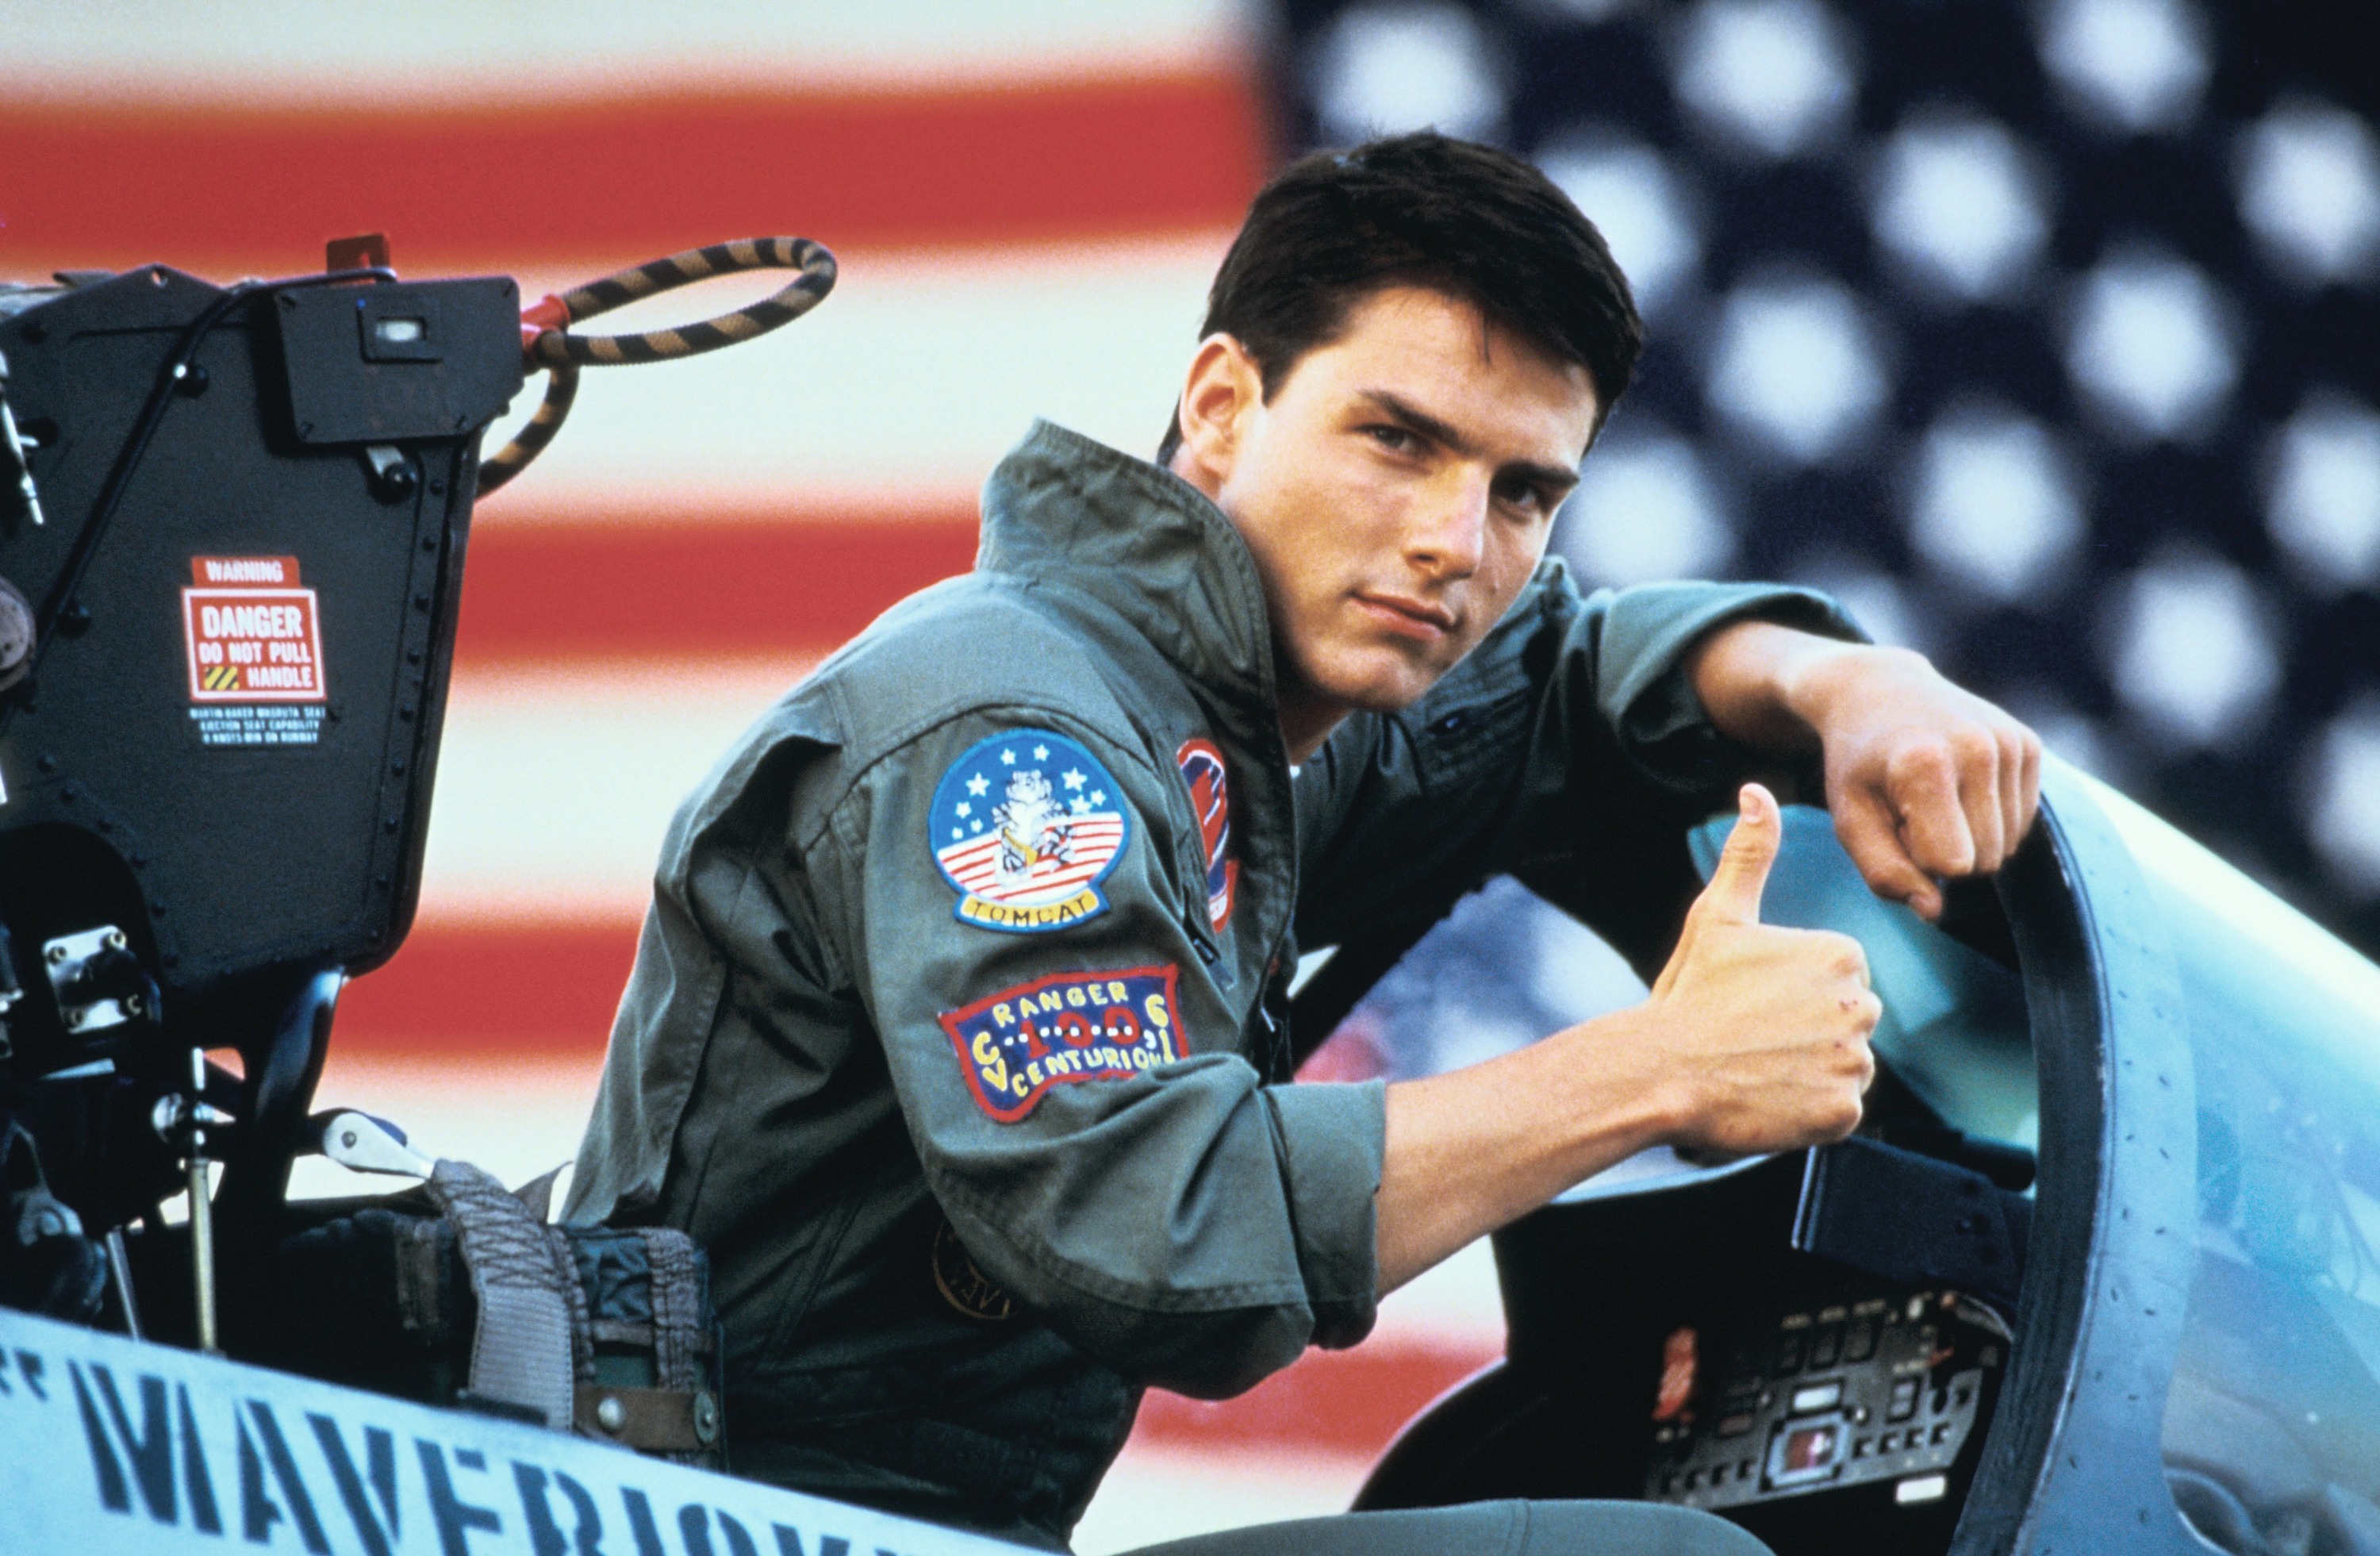 Top Gun 3' Is Taking Flight At Paramount: Here's Everything We Know